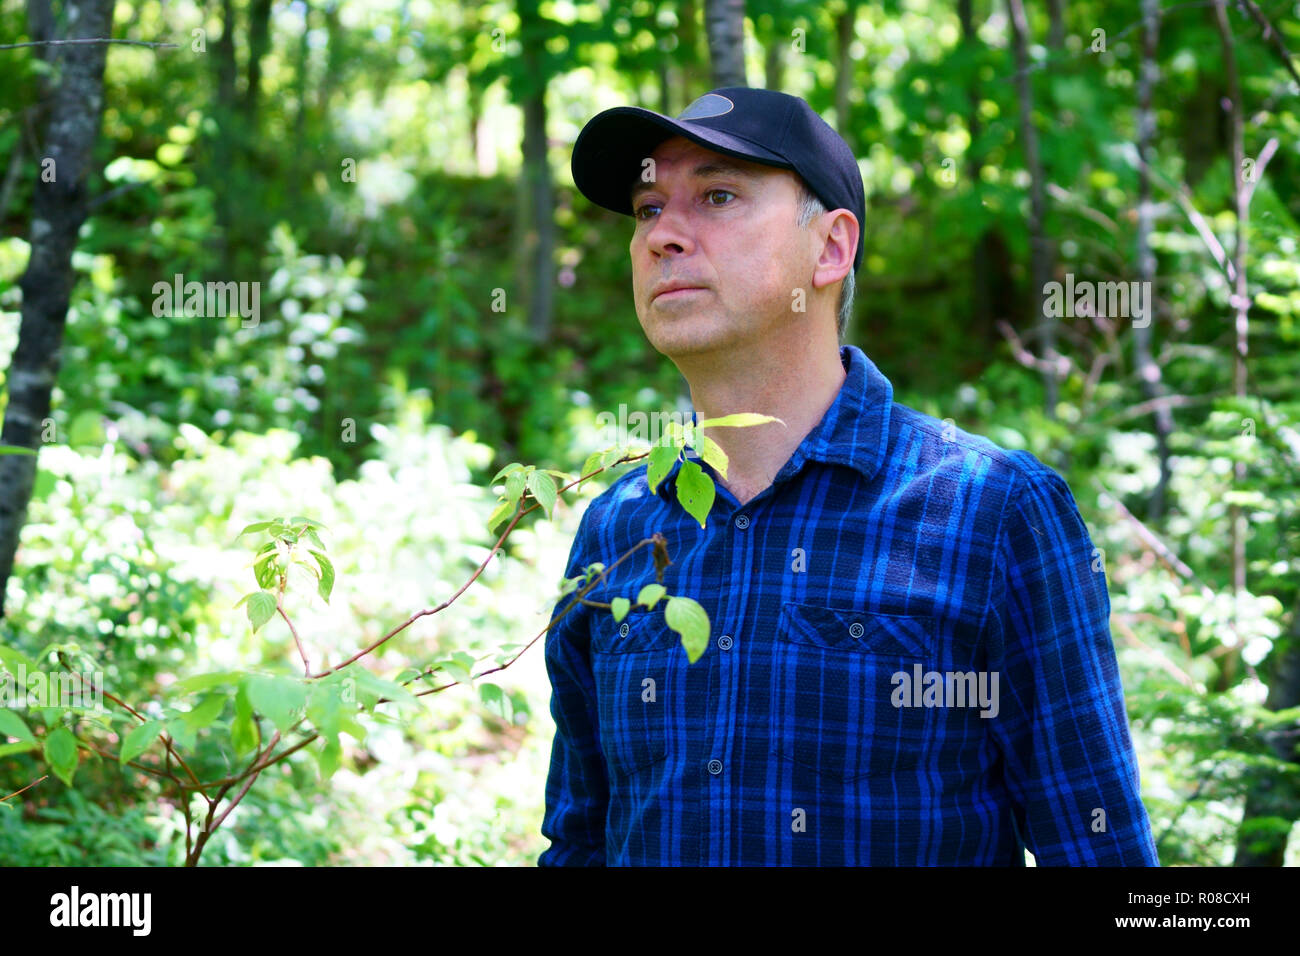 A caucasian man is looking away while hiking in the forest wearing a blue check shirt and a black hat. Stock Photo